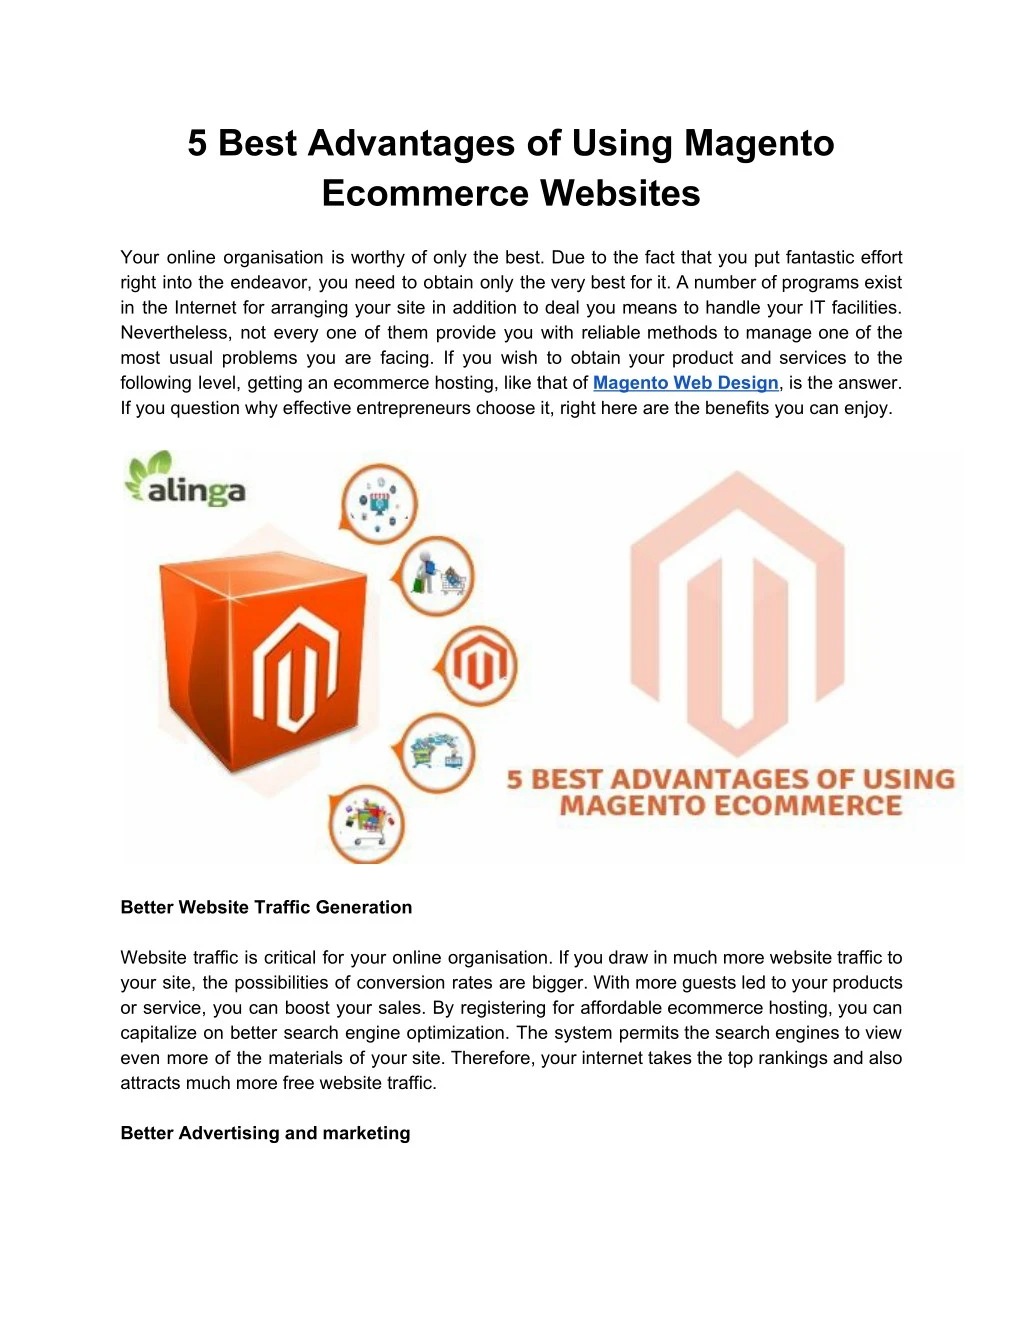 5 best advantages of using magento ecommerce